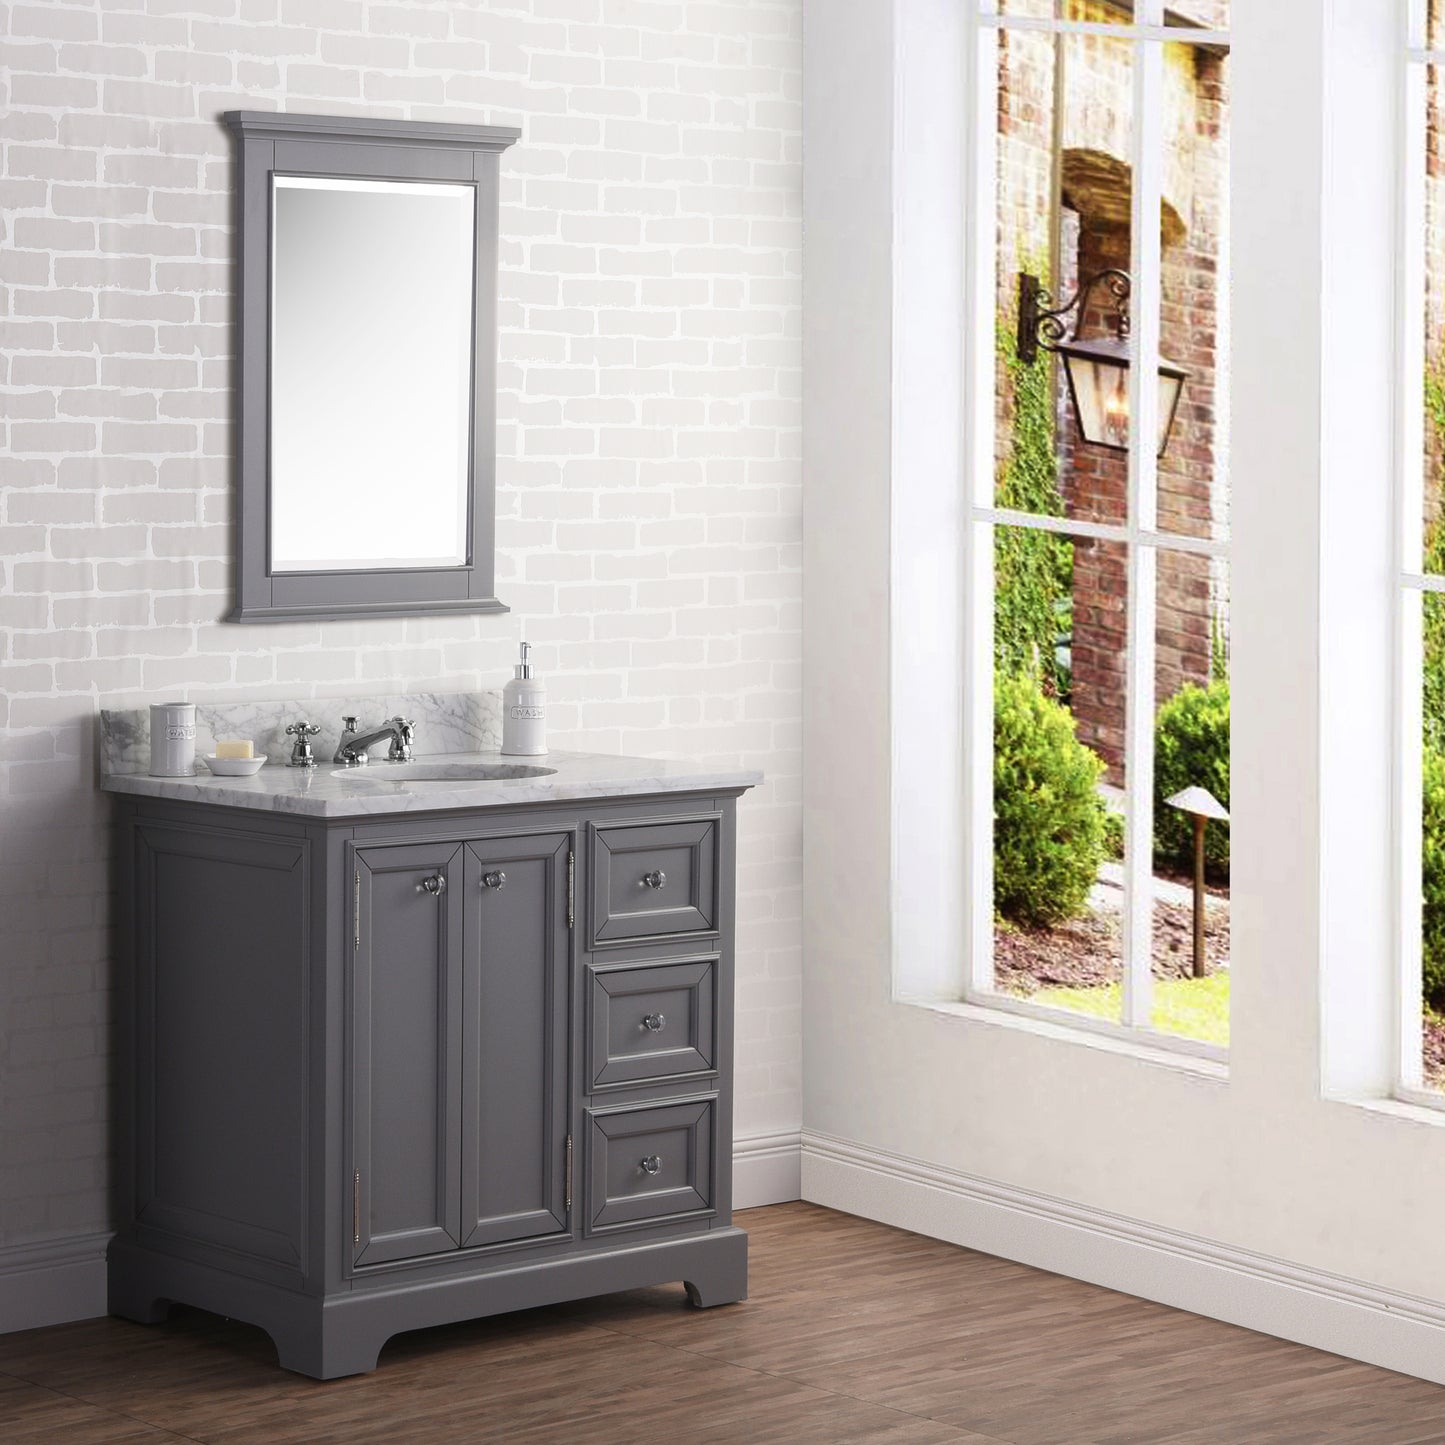 Water Creation 36 Inch Wide Single Sink Carrara Marble Bathroom Vanity With Matching Mirror And Faucet(s) From The Derby Collection - Luxe Bathroom Vanities